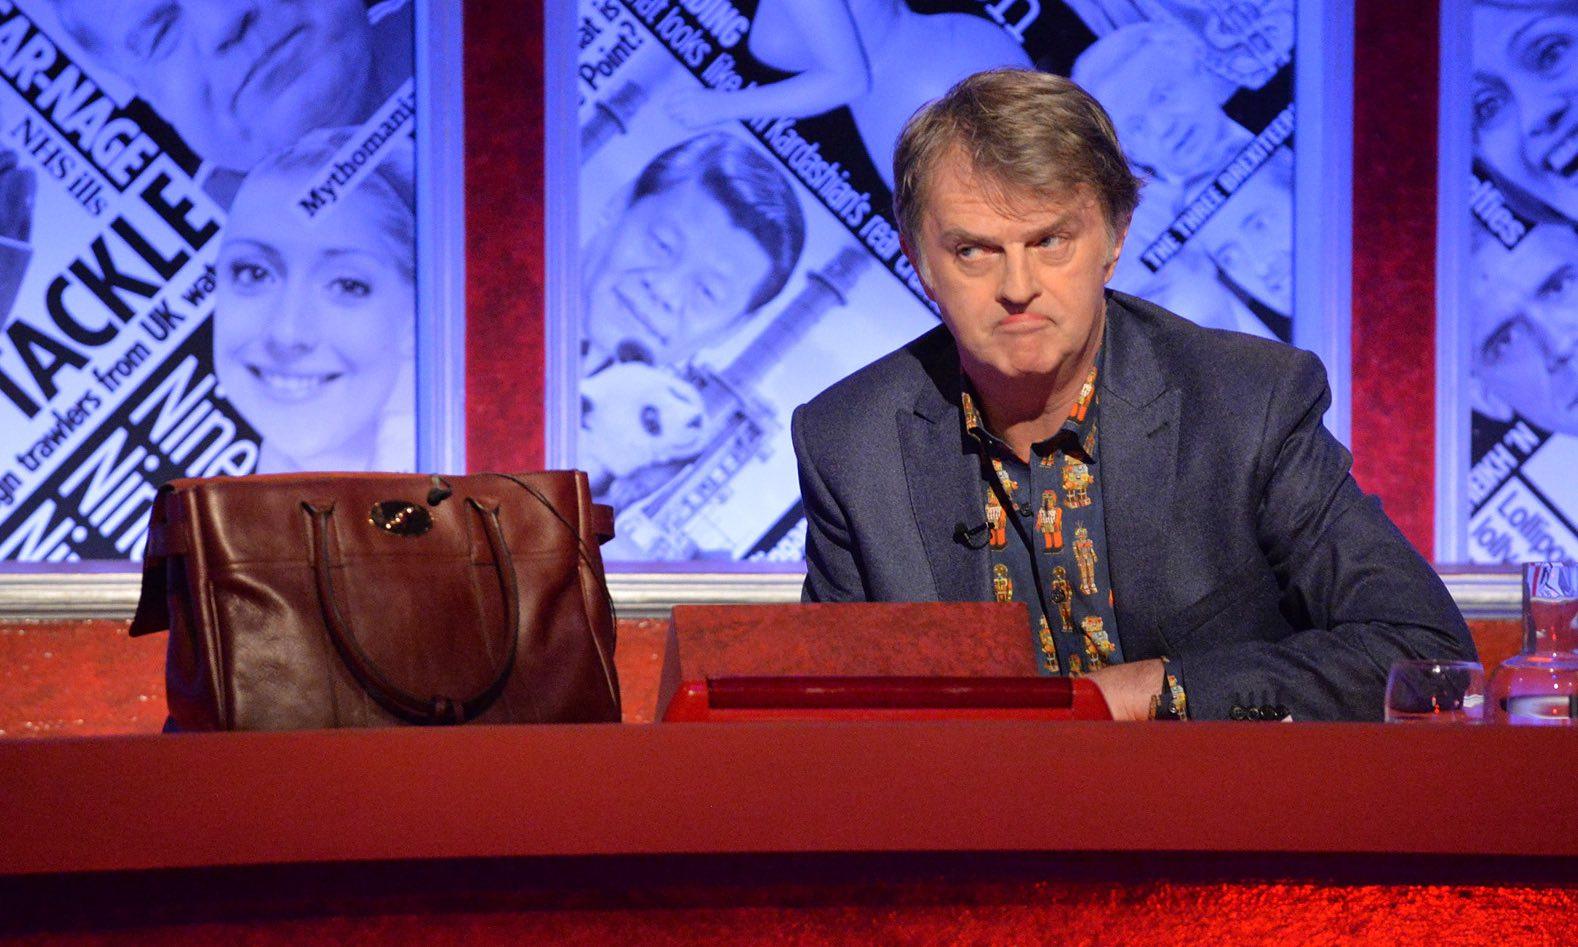 A brown leather handbag was placed next to panellist Paul Merton in Ms Morgan's place after Tory MPs criticised her for owning a designer Mulberry handbag worth some £950